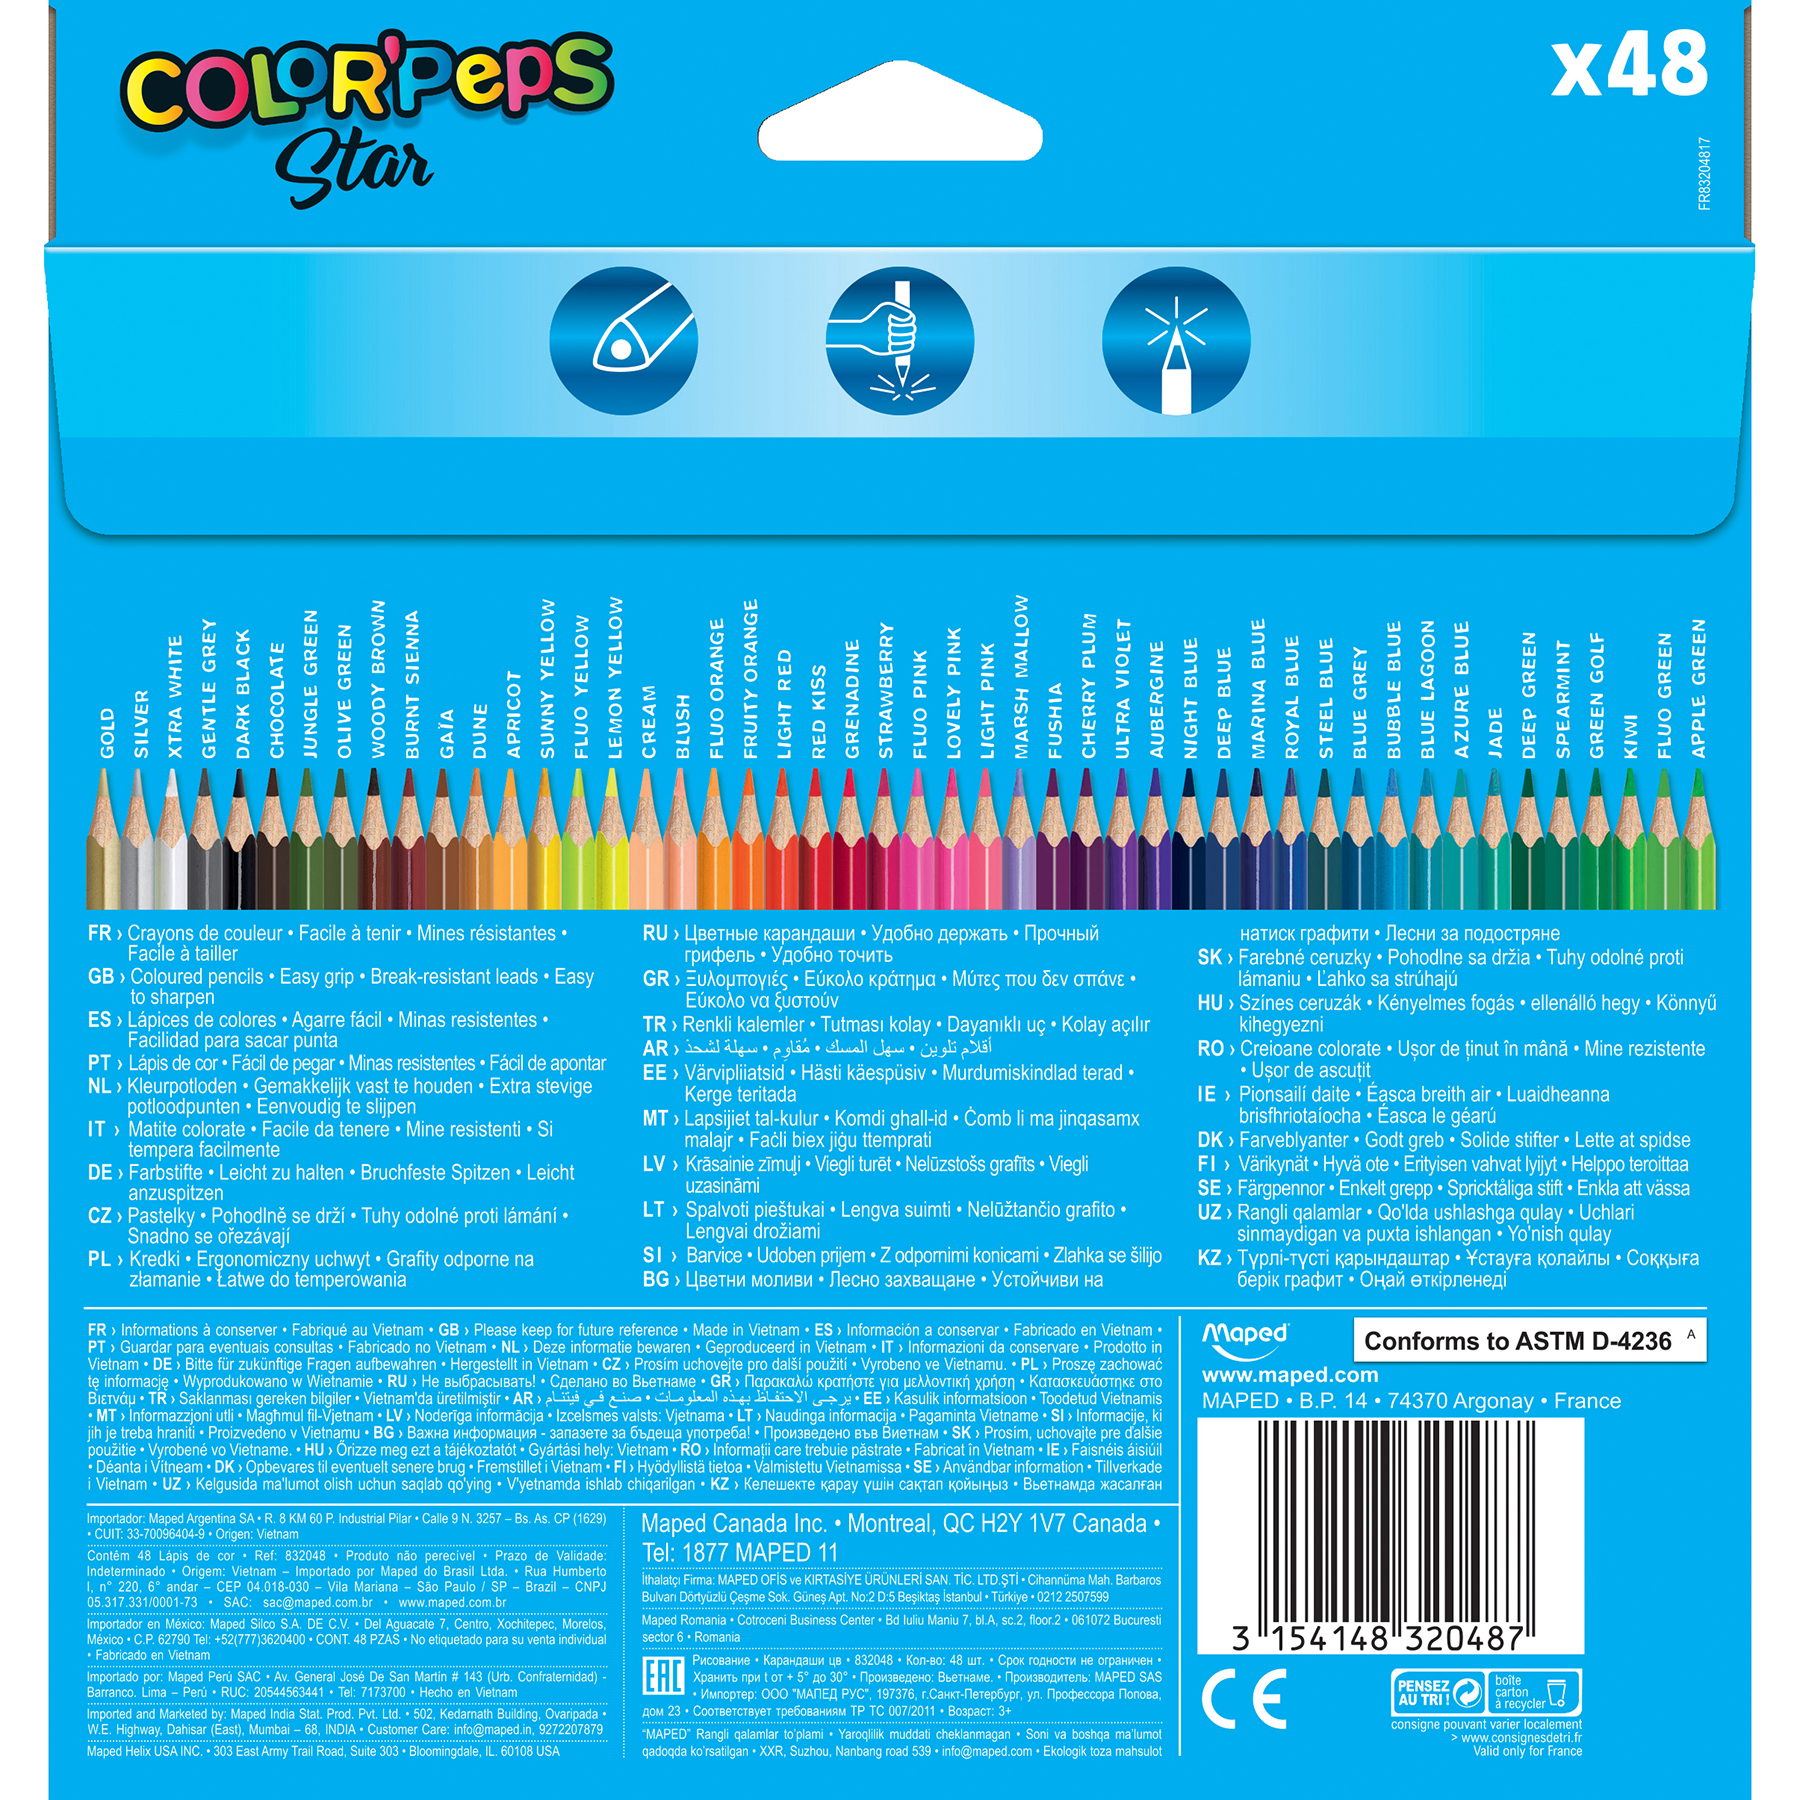 Maped® Color'Peps Triangular Colored Pencils, 2 Packs of 48